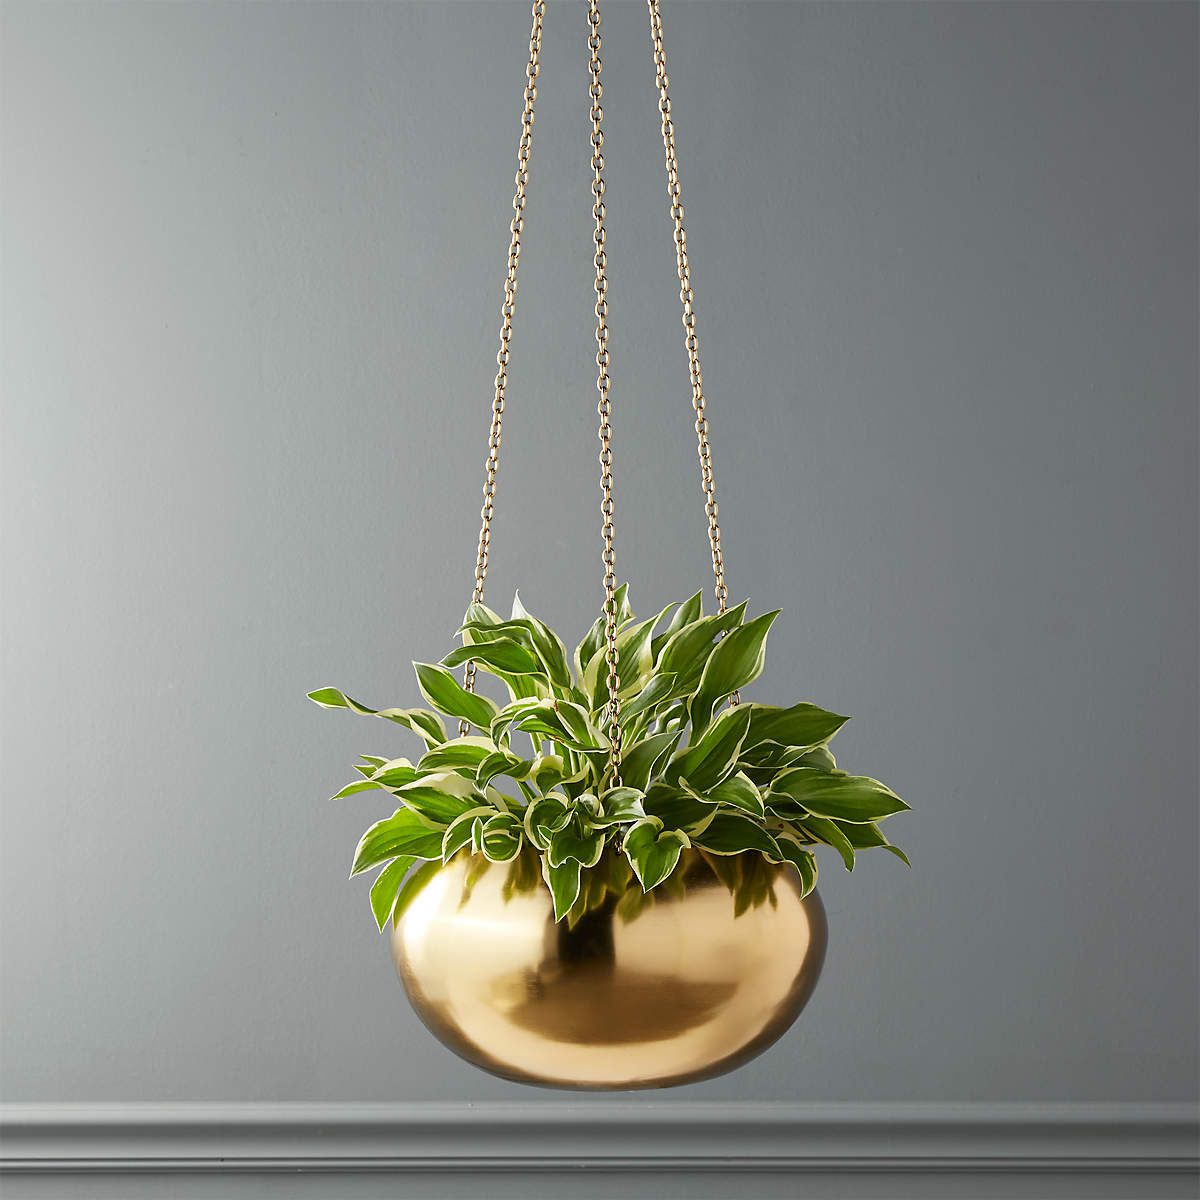 Hanging Gold Planter from CB2